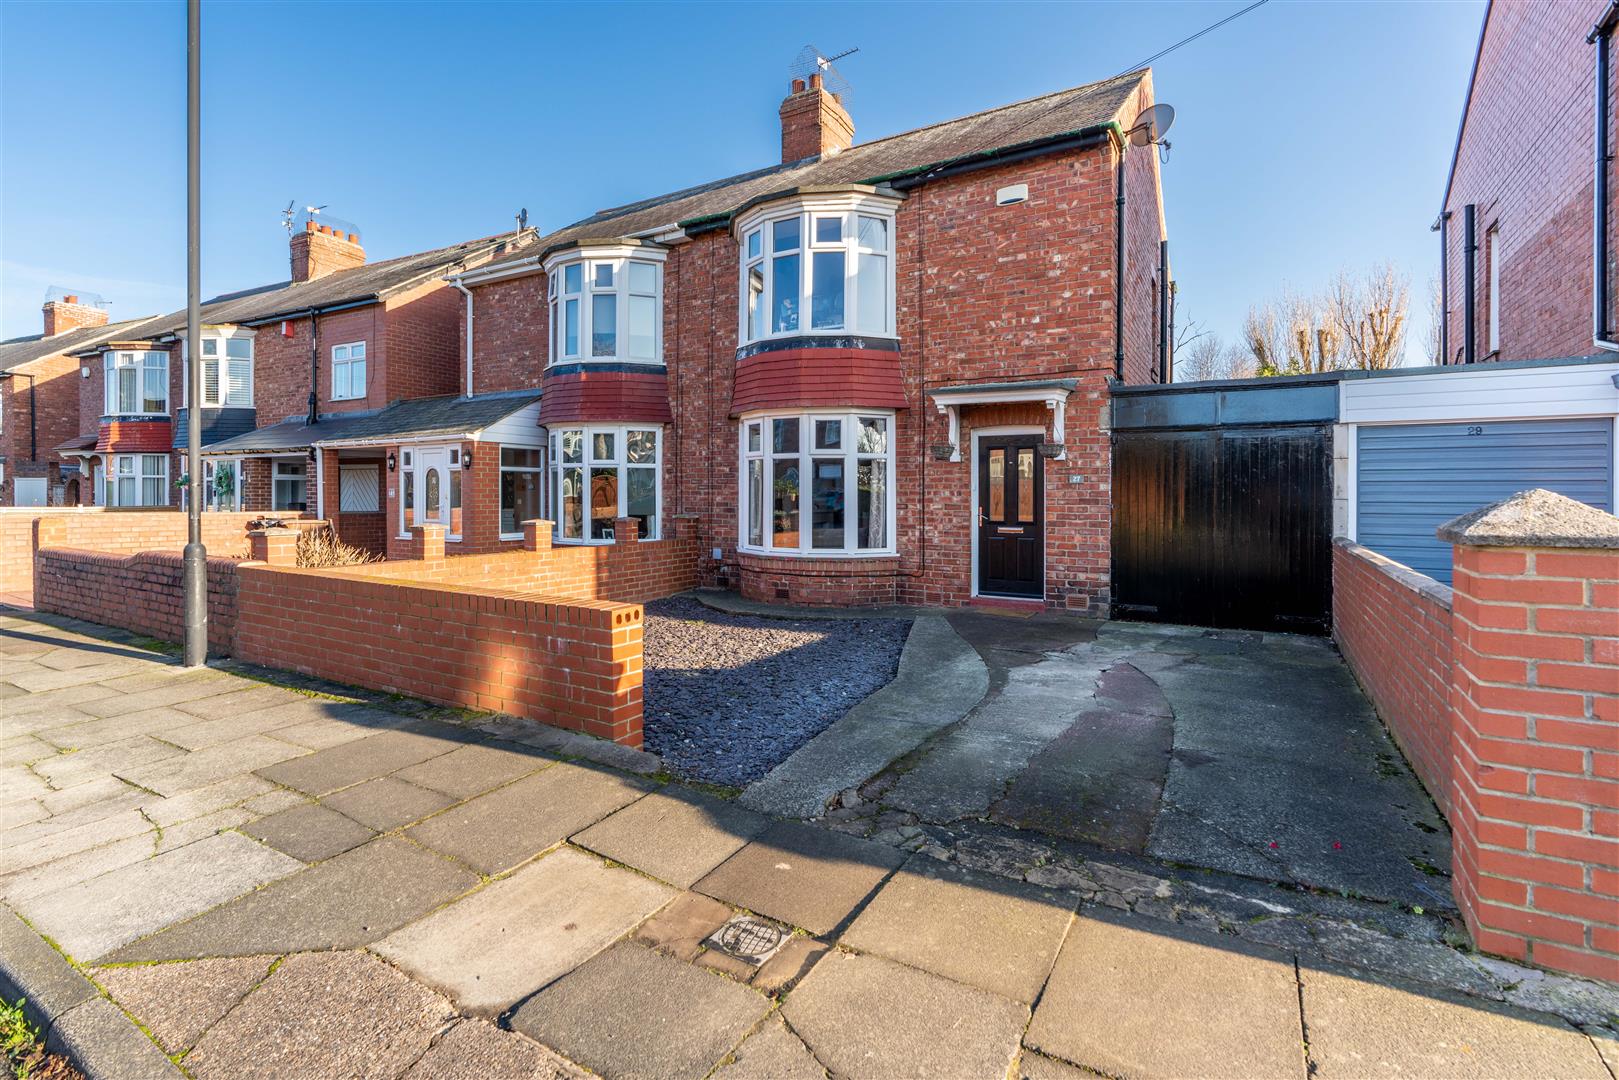 2 bed semi-detached house for sale in Otterburn Avenue, Whitley Bay, NE25